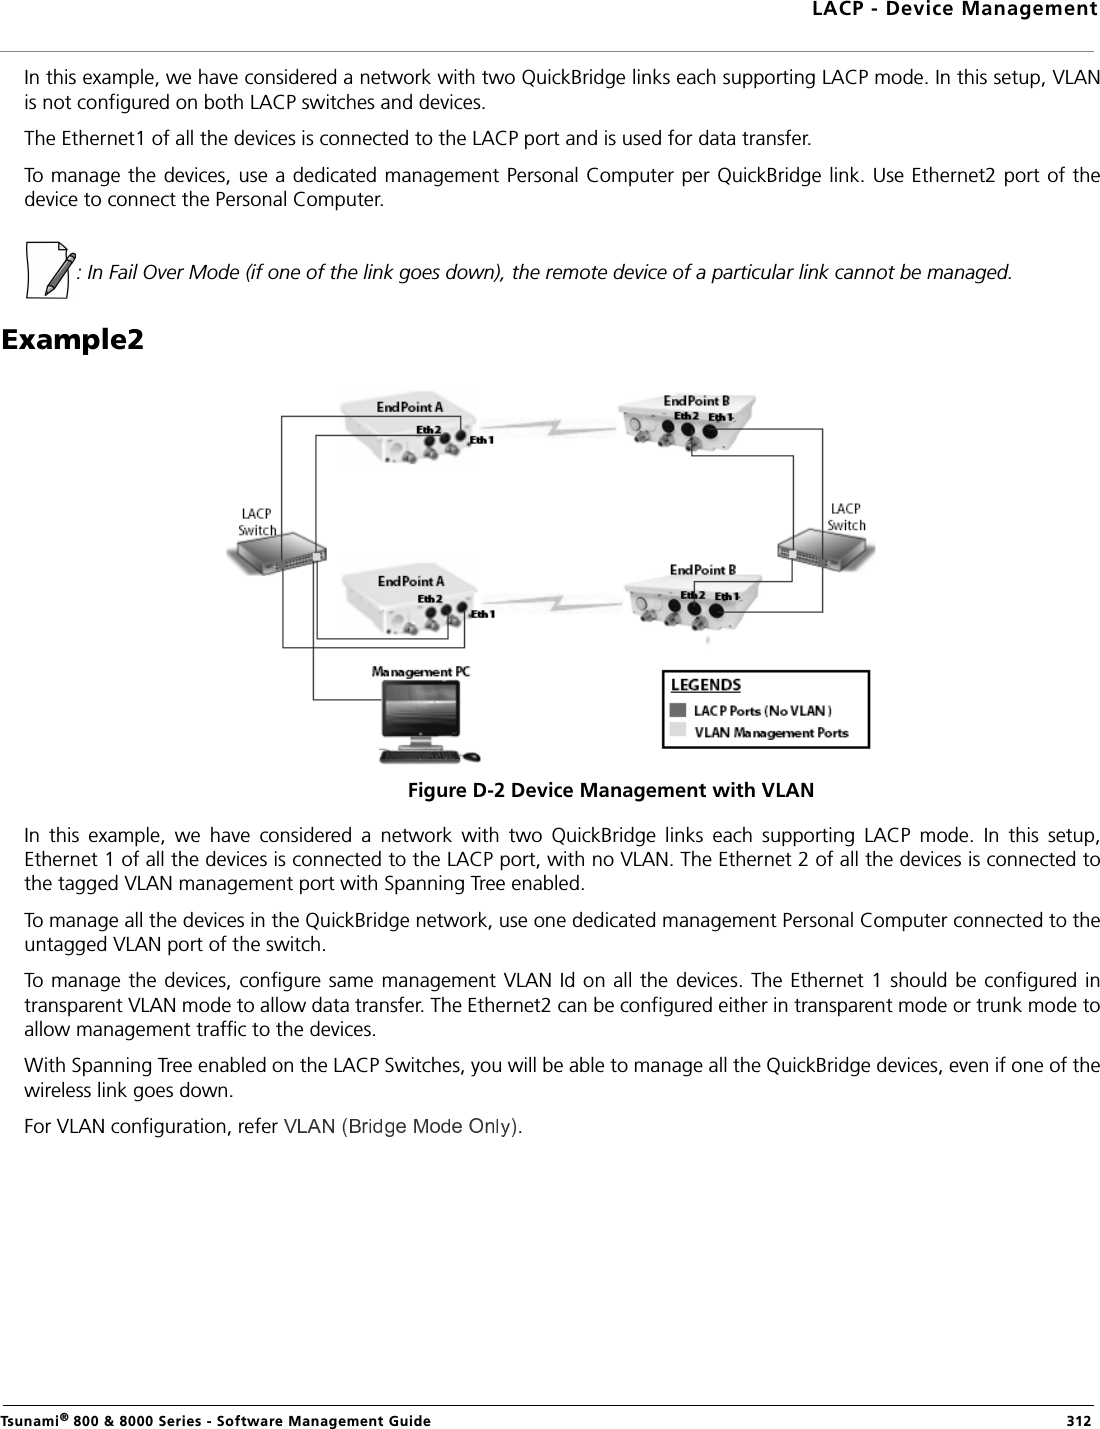 LACP - Device ManagementTsunami® 800 &amp; 8000 Series - Software Management Guide  312In this example, we have considered a network with two QuickBridge links each supporting LACP mode. In this setup, VLANis not configured on both LACP switches and devices.The Ethernet1 of all the devices is connected to the LACP port and is used for data transfer. To manage the devices, use a dedicated management Personal Computer per QuickBridge link. Use Ethernet2 port of thedevice to connect the Personal Computer.: In Fail Over Mode (if one of the link goes down), the remote device of a particular link cannot be managed.Example2Figure D-2 Device Management with VLANIn  this  example,  we  have  considered  a  network  with  two  QuickBridge  links  each  supporting  LACP  mode.  In  this  setup,Ethernet 1 of all the devices is connected to the LACP port, with no VLAN. The Ethernet 2 of all the devices is connected tothe tagged VLAN management port with Spanning Tree enabled.To manage all the devices in the QuickBridge network, use one dedicated management Personal Computer connected to theuntagged VLAN port of the switch. To manage the devices,  configure same management VLAN Id on  all the devices. The Ethernet 1 should be configured intransparent VLAN mode to allow data transfer. The Ethernet2 can be configured either in transparent mode or trunk mode toallow management traffic to the devices. With Spanning Tree enabled on the LACP Switches, you will be able to manage all the QuickBridge devices, even if one of thewireless link goes down.For VLAN configuration, refer  .